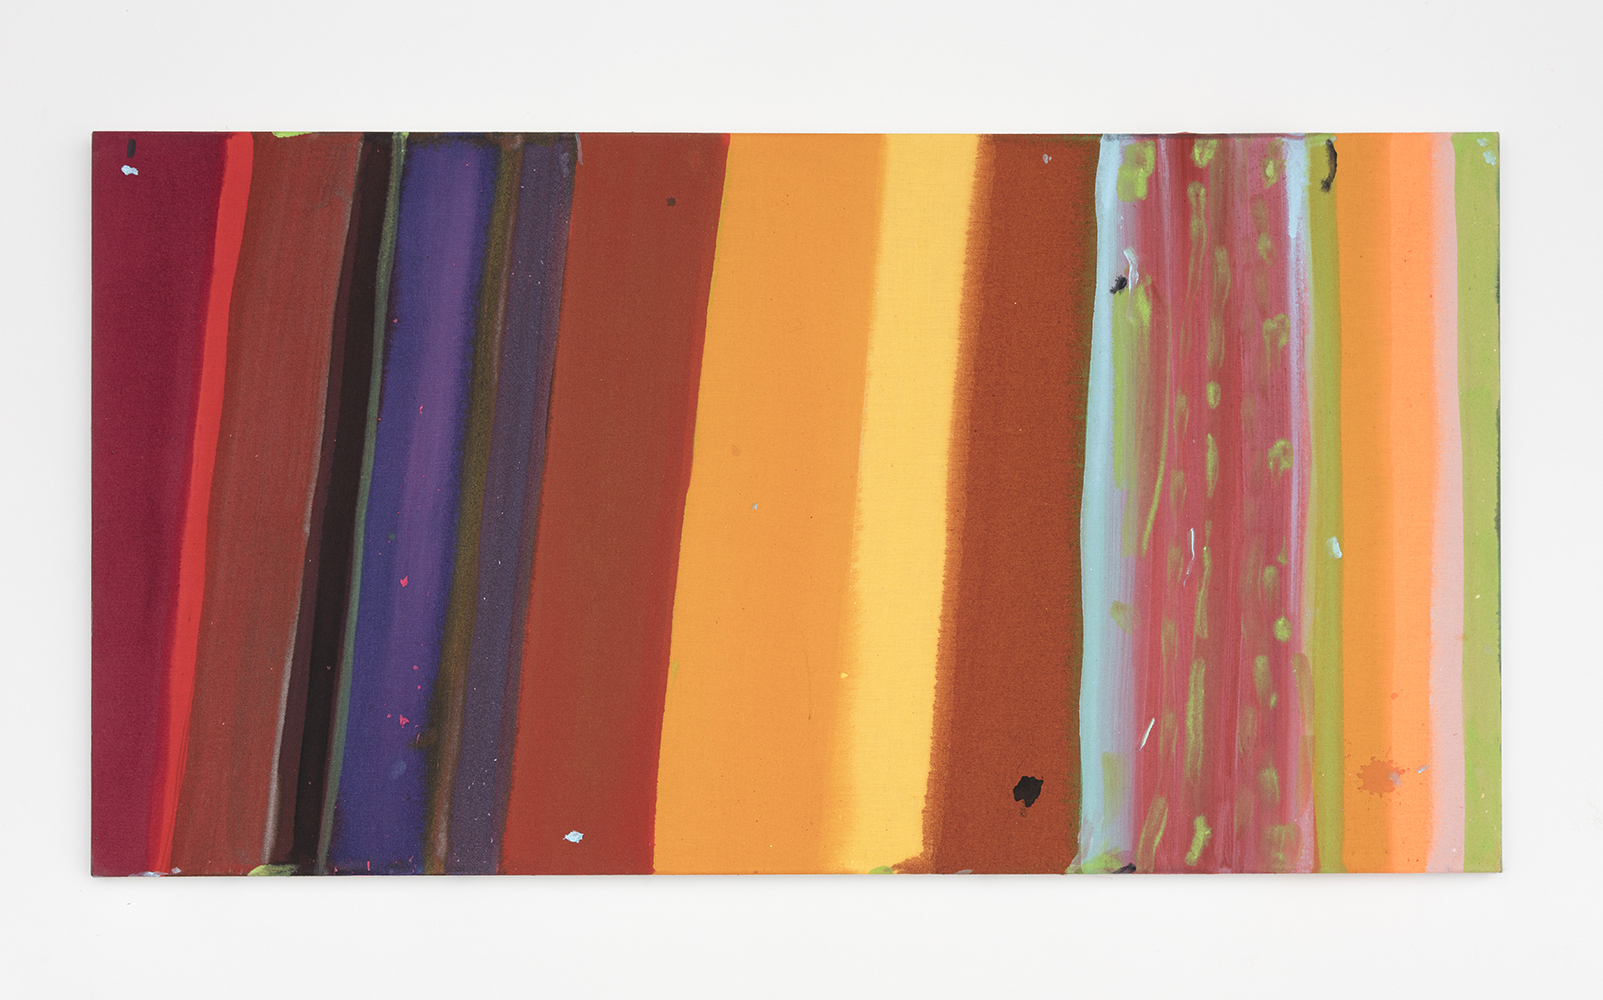 Kevin McNamee-Tweed.<em> Untitled</em>, 2019. Acrylic and colored pencil on muslin, 5 3/4 x 17 inches (14.6 x 43.2 cm)